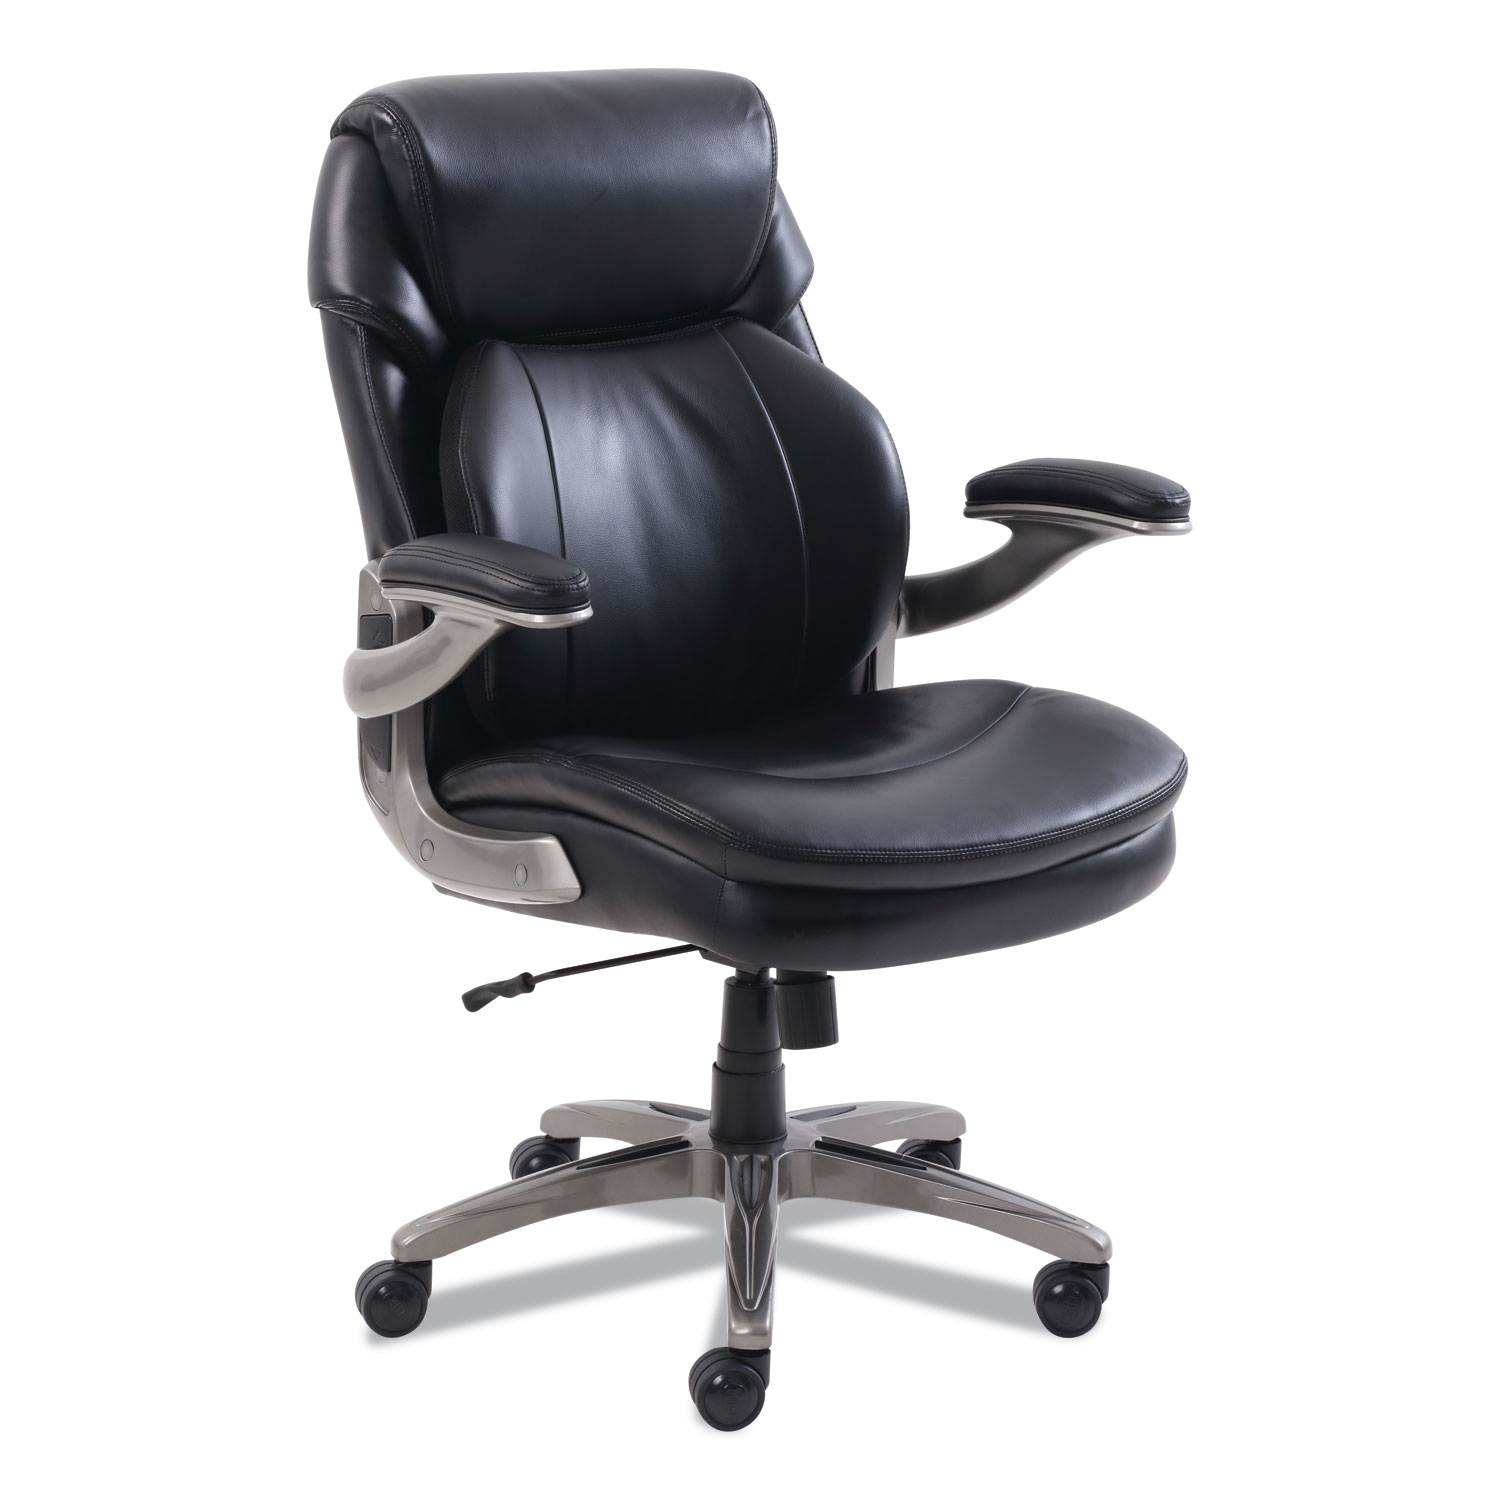  SertaPedic 48966 Cosset Mid-Back Executive Chair, Supports up to 275 lbs., Black Seat/Black Back, Slate Base (SRJ48966) 